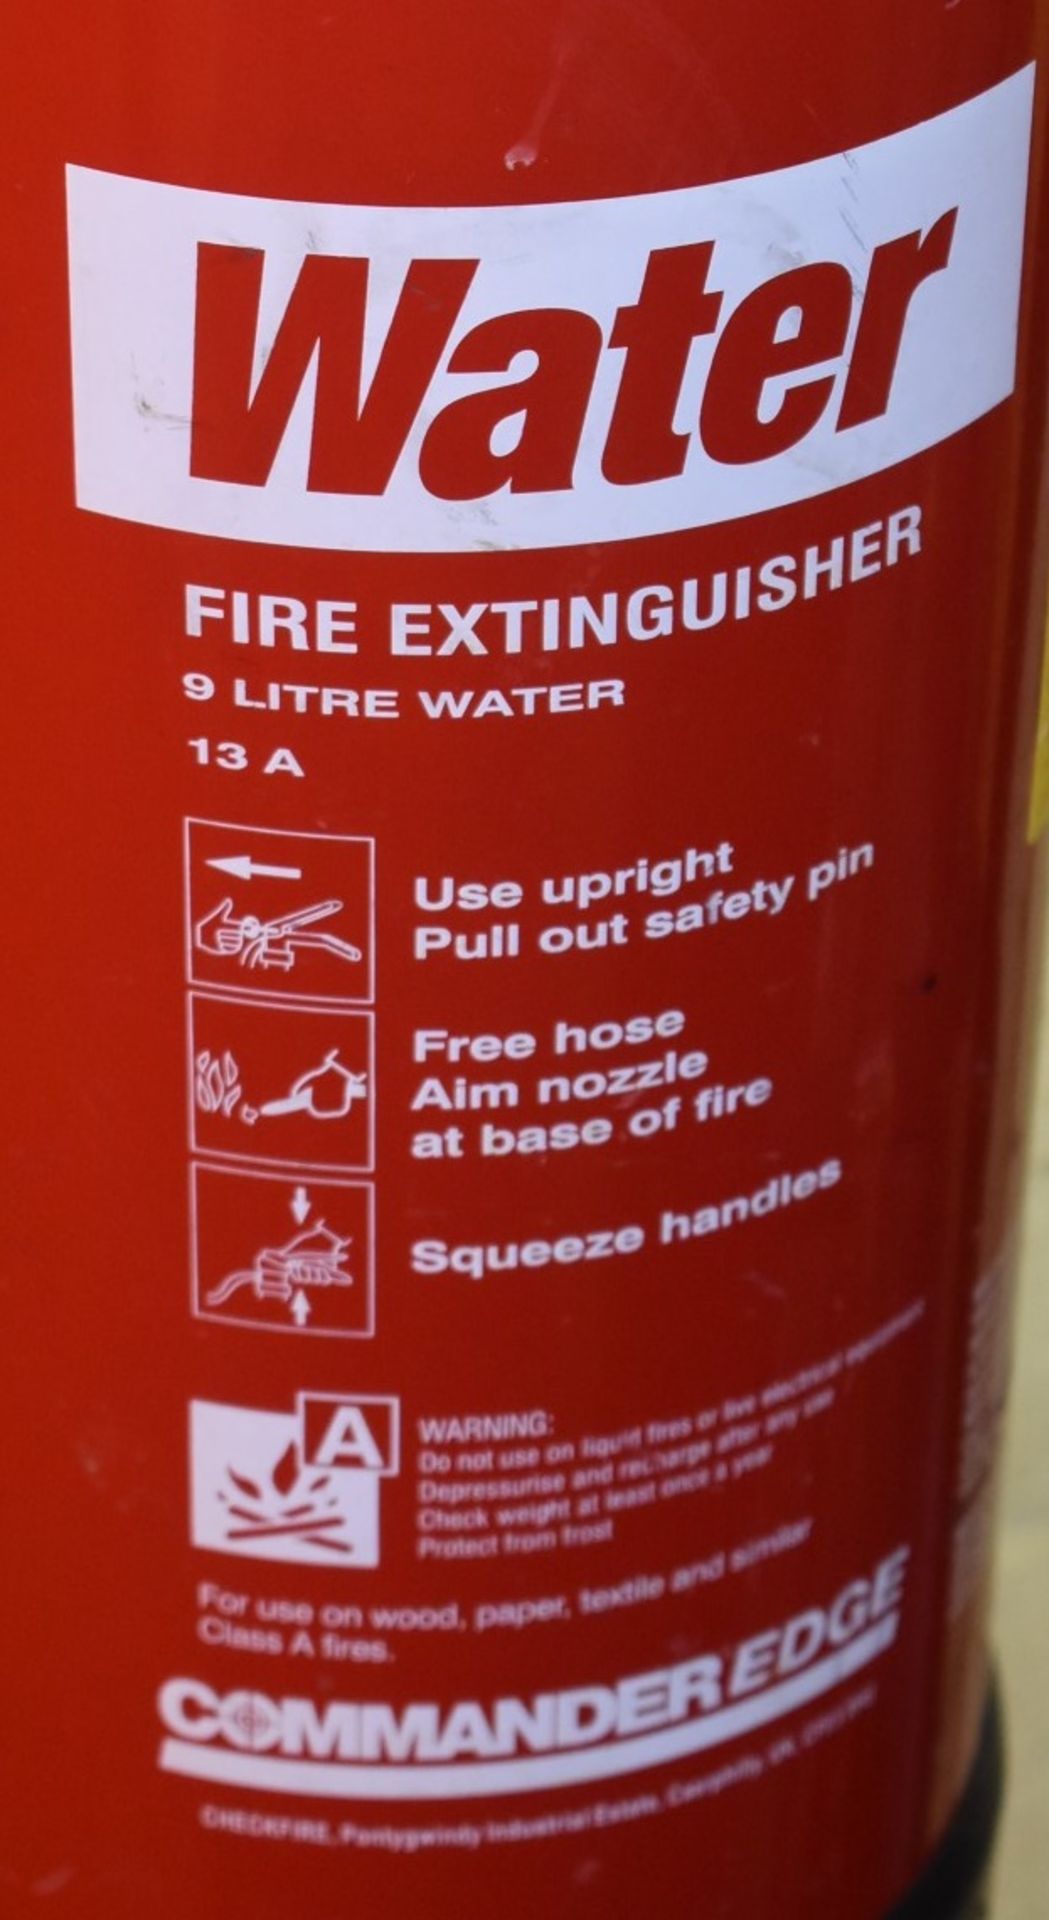 1 x 6 Litre Water Fire Extinguisher - CL520 - Location: London W10 - Image 2 of 2